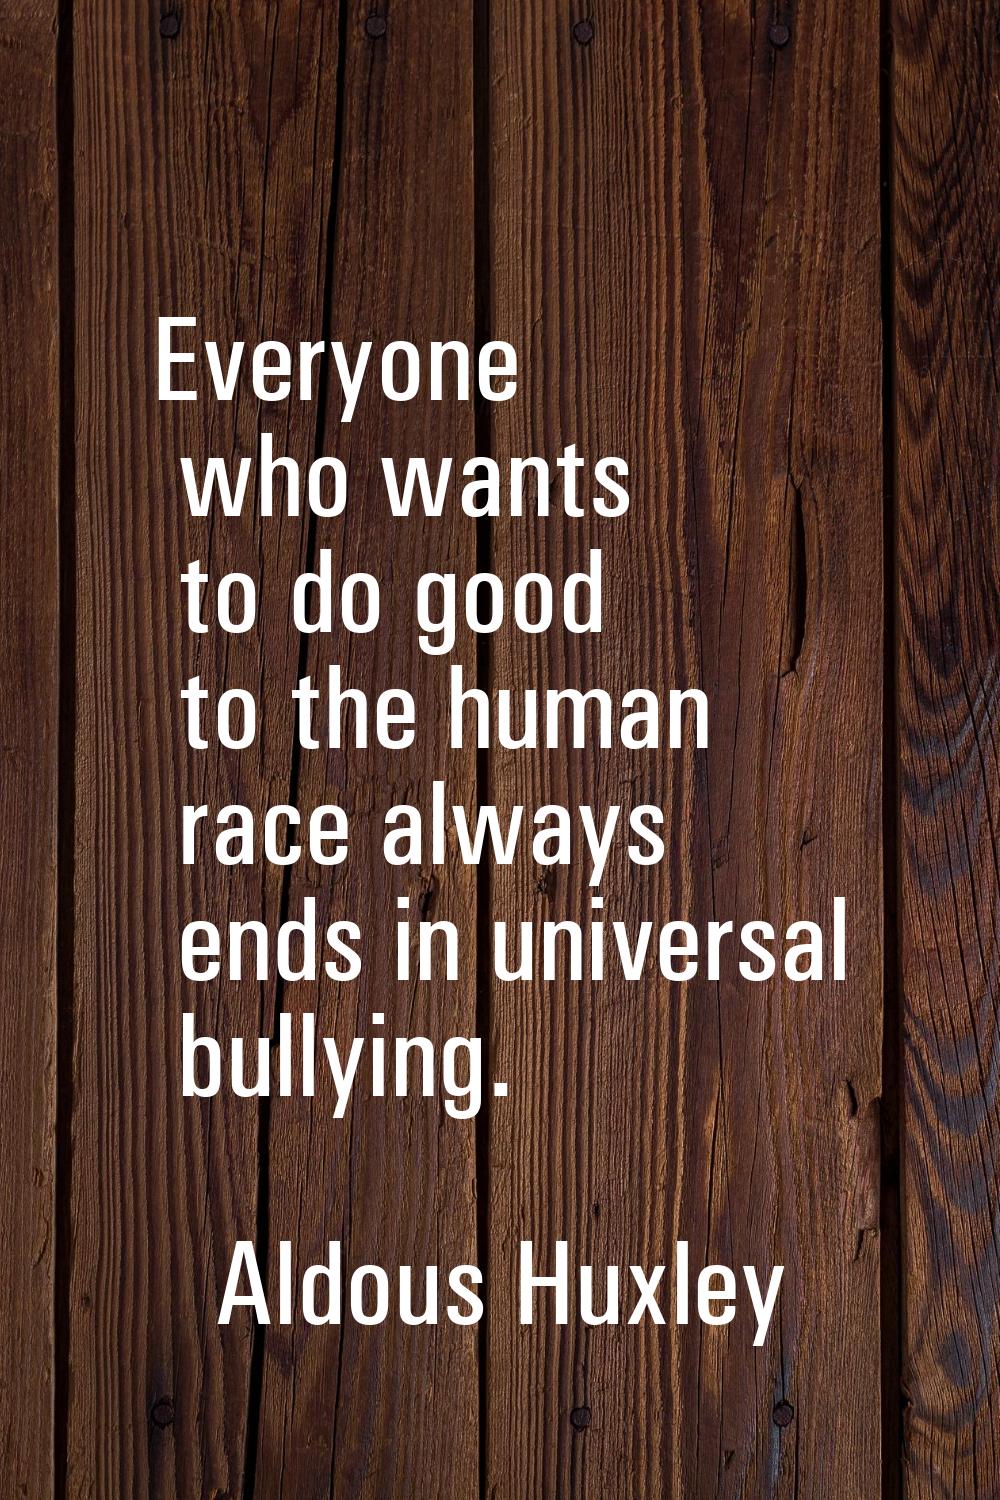 Everyone who wants to do good to the human race always ends in universal bullying.